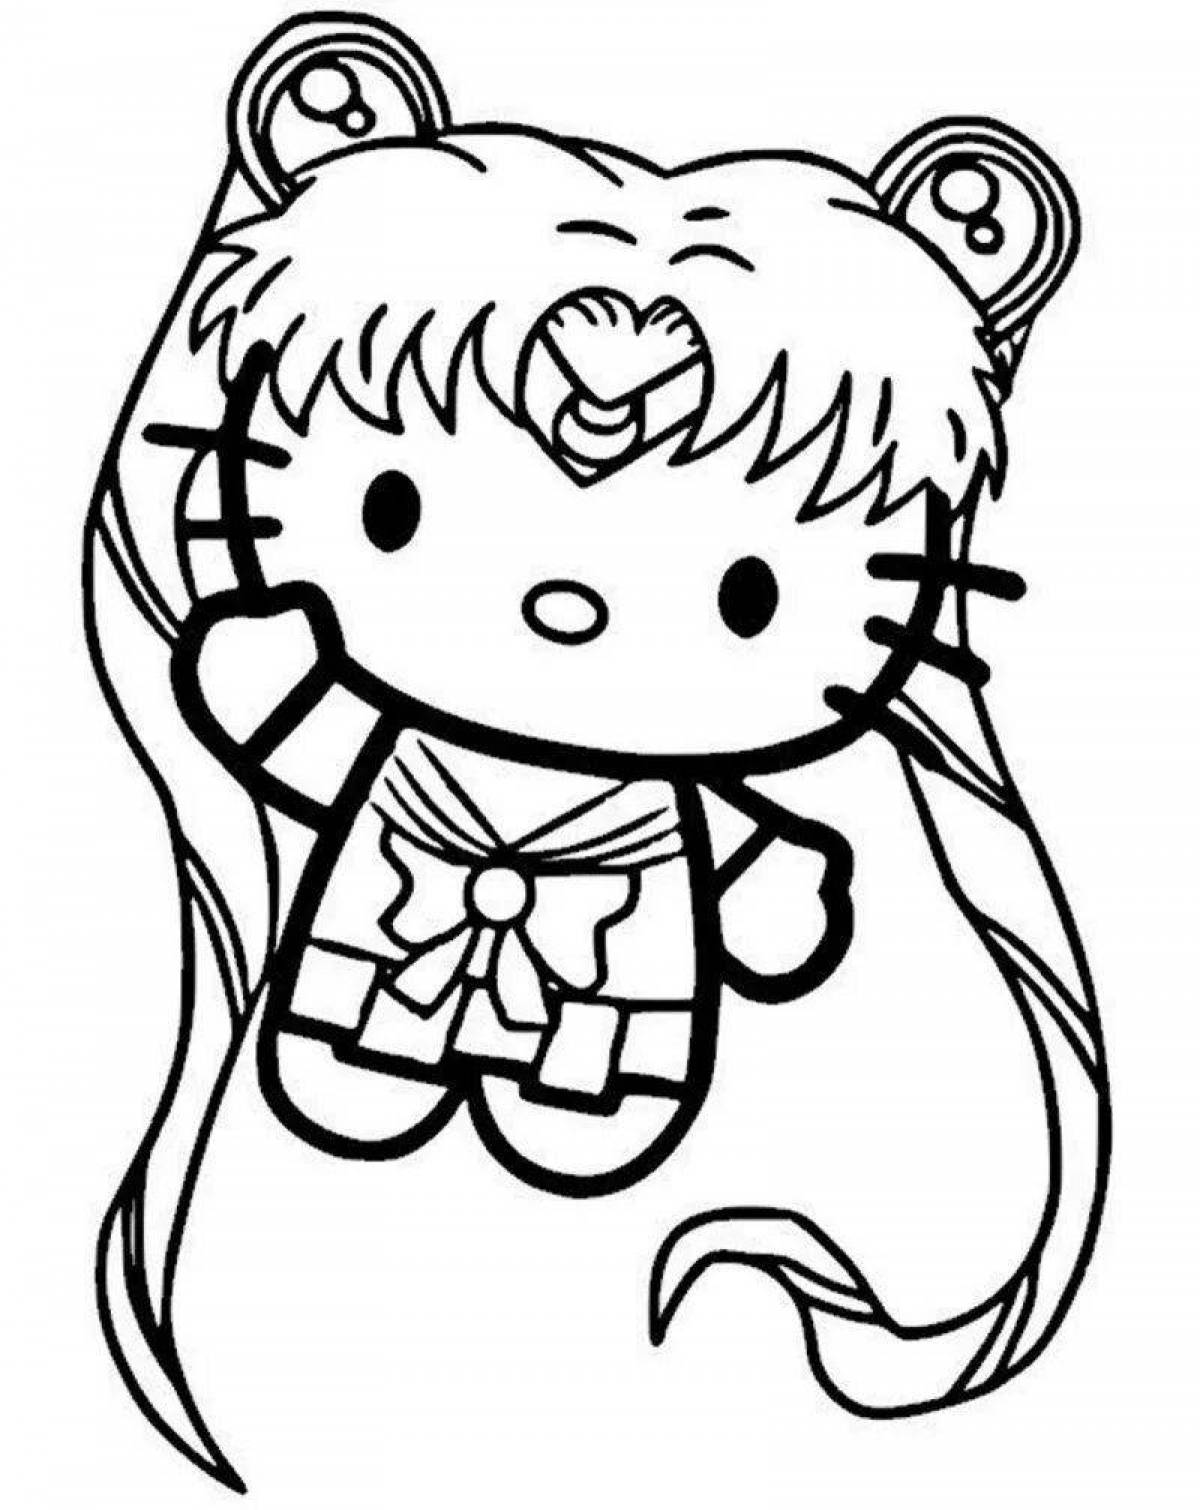 Radiant coloring page hello kitty black and white kuromi